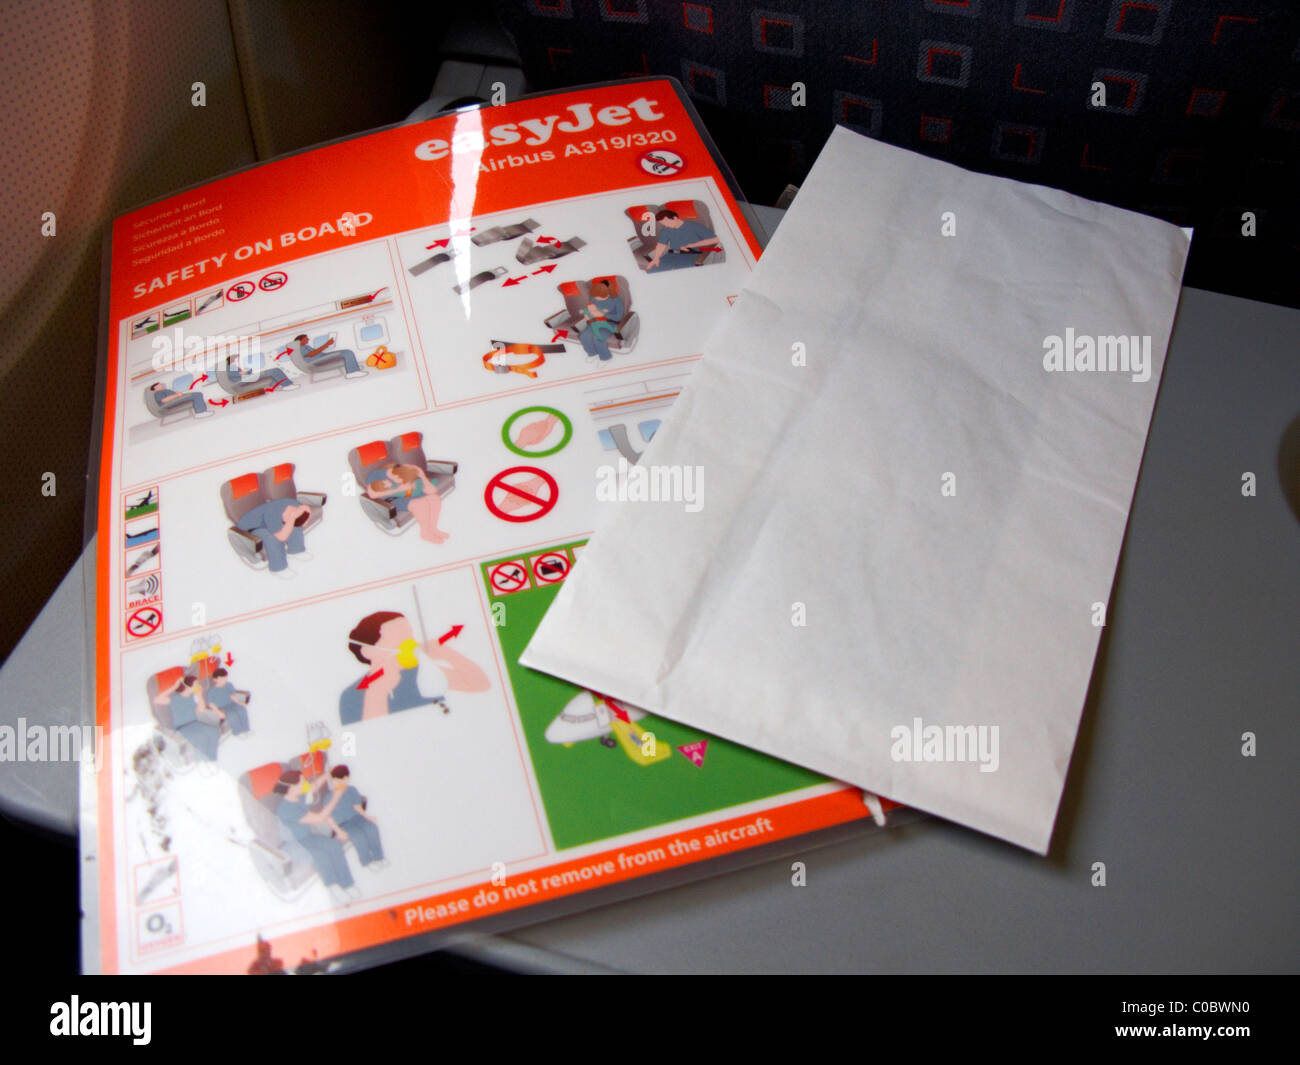 easyjet a319 airbus aircraft safety on board card and sick bag Stock Photo